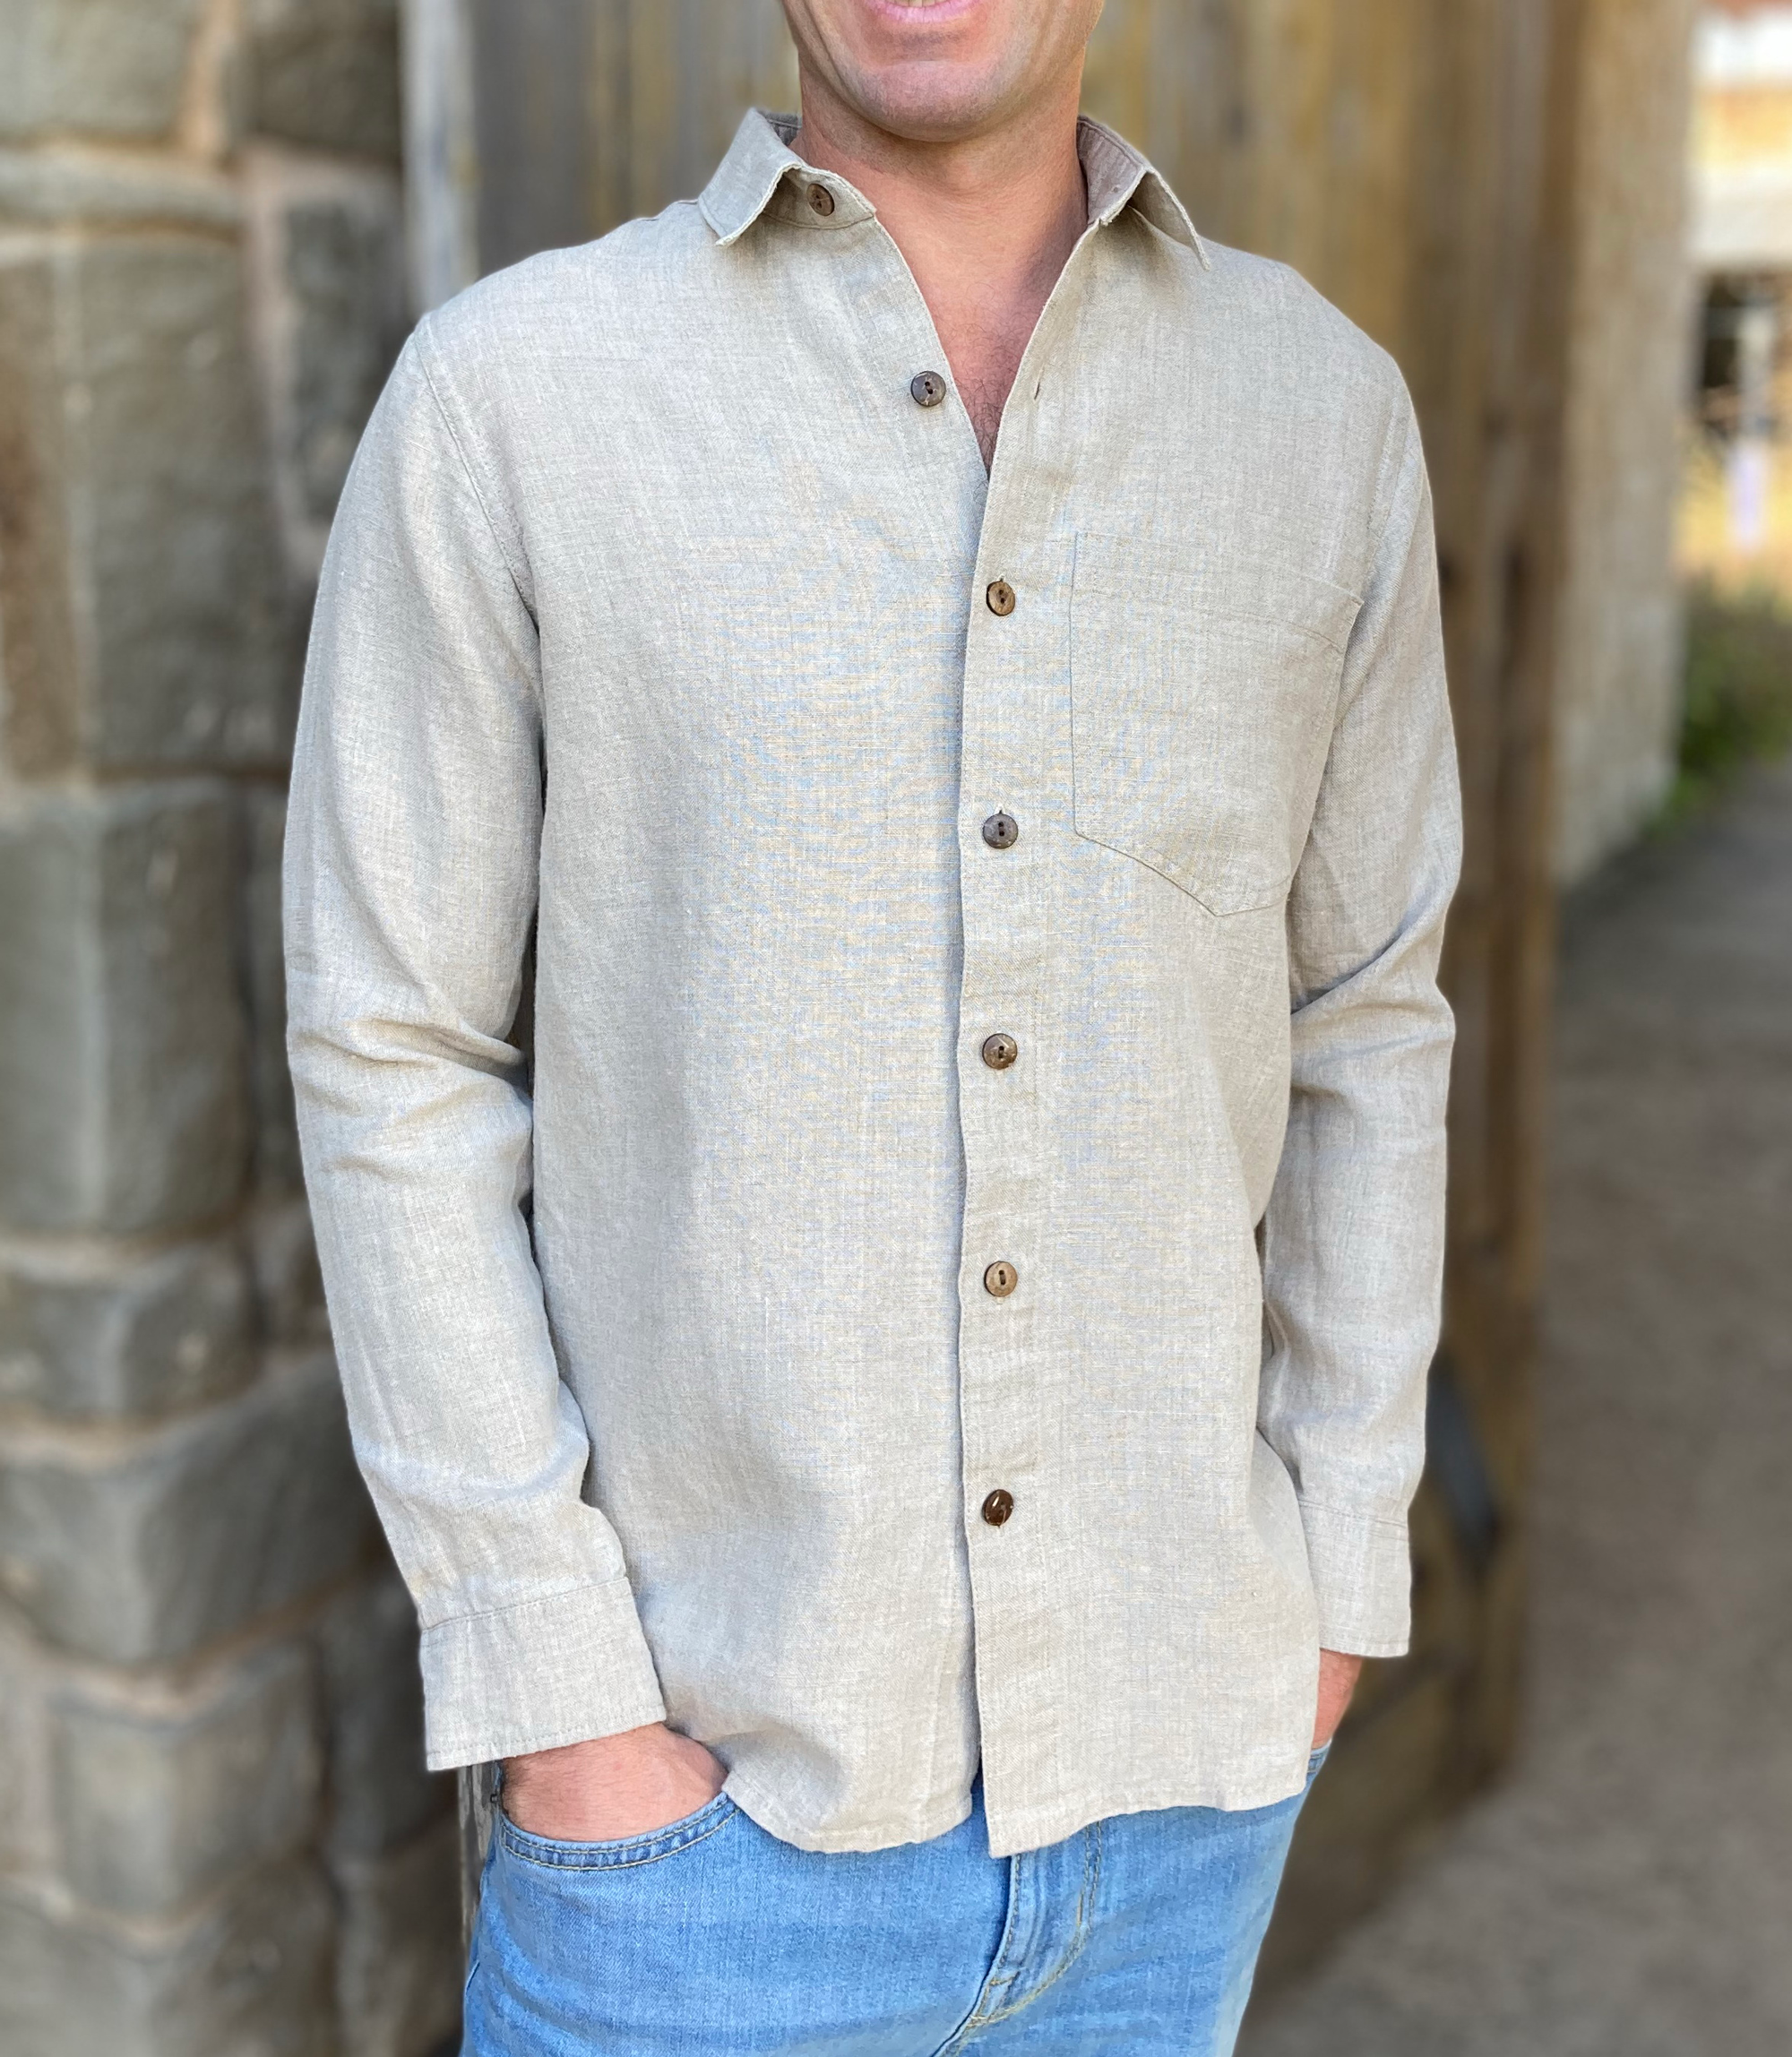 Button Down (beige flax linen) - The Transient Design does flax right.